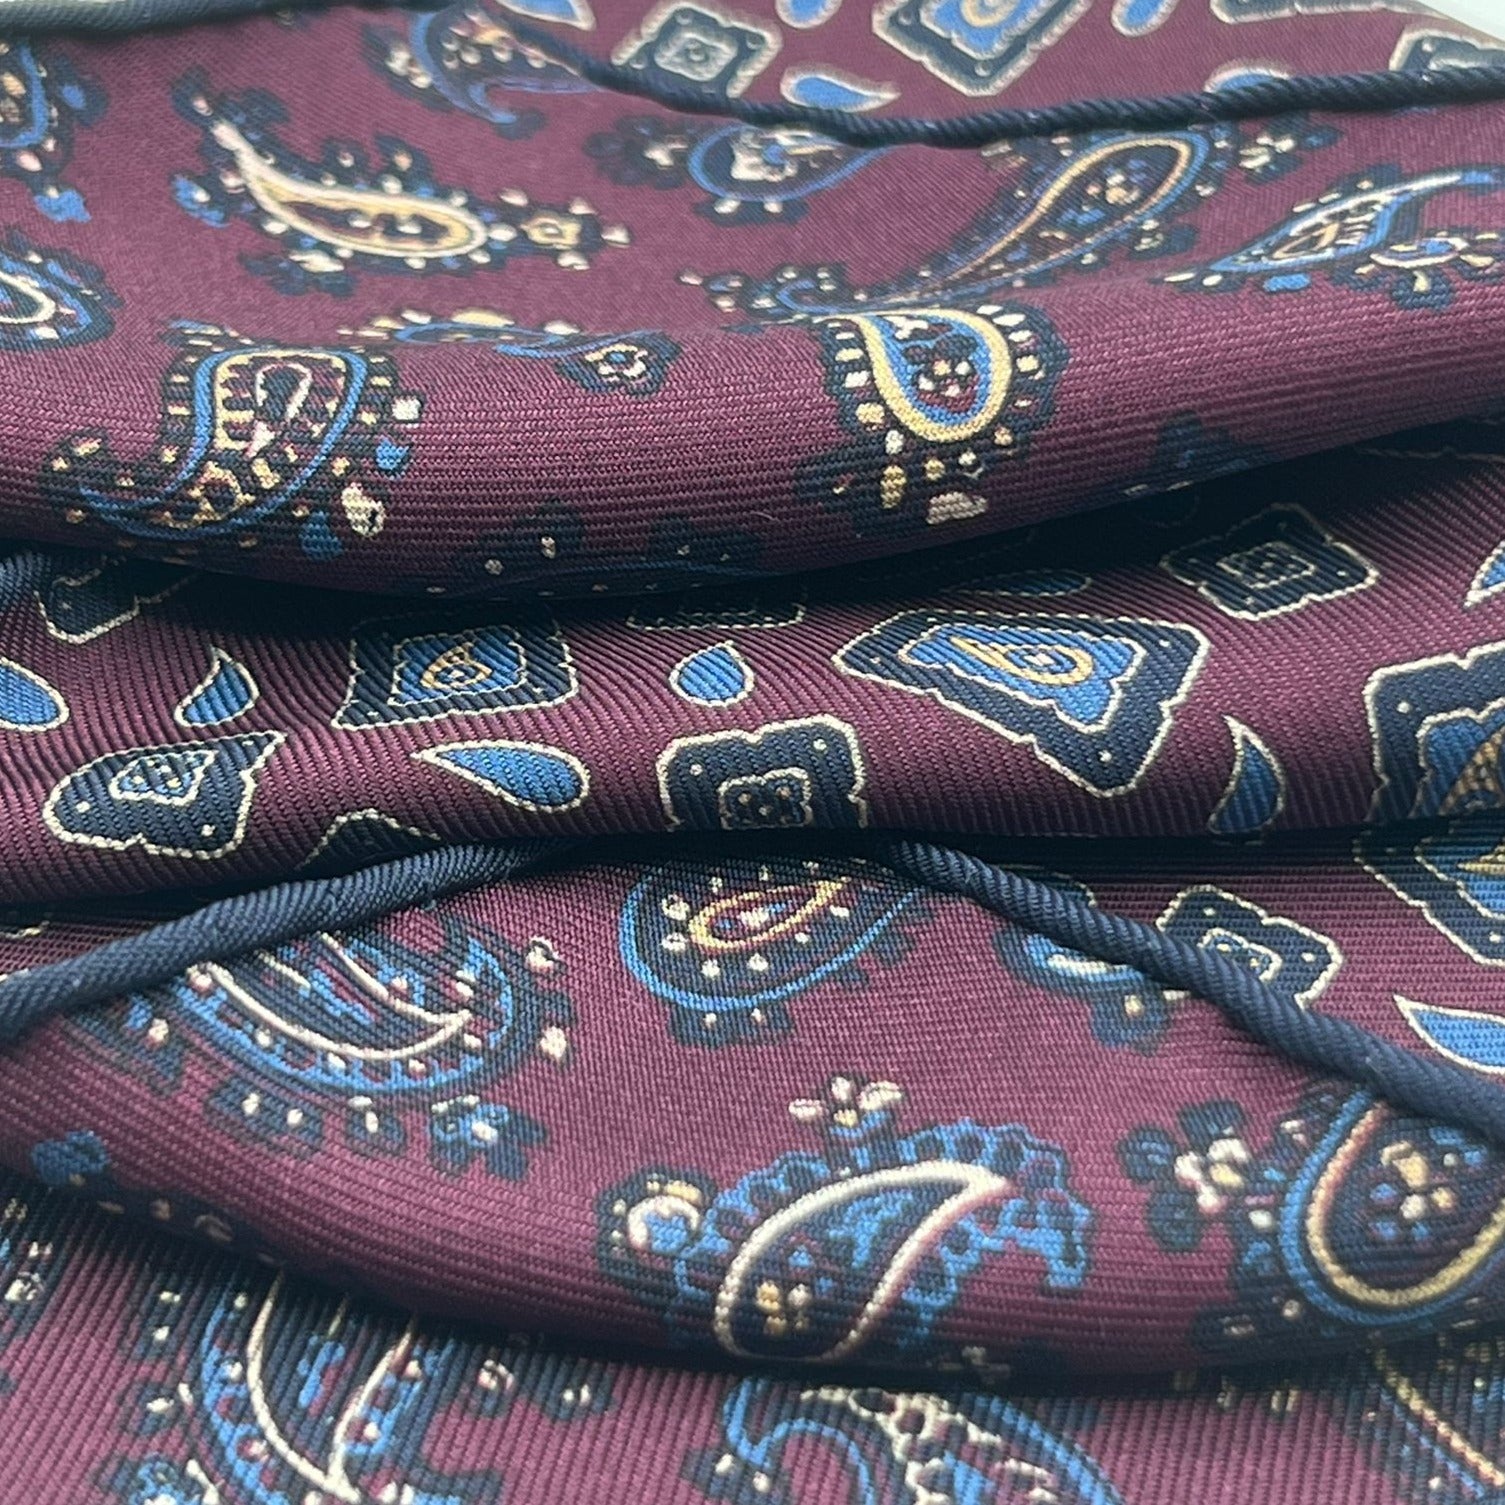 Holliday & Brown Hand-rolled   Holliday & Brown for Cruciani & Bella 100% Silk Red Wine, Blue, Light Blue and Gold Double Faces Patterned  Motif  Pocket Square Handmade in Italy 32 cm X 32 cm